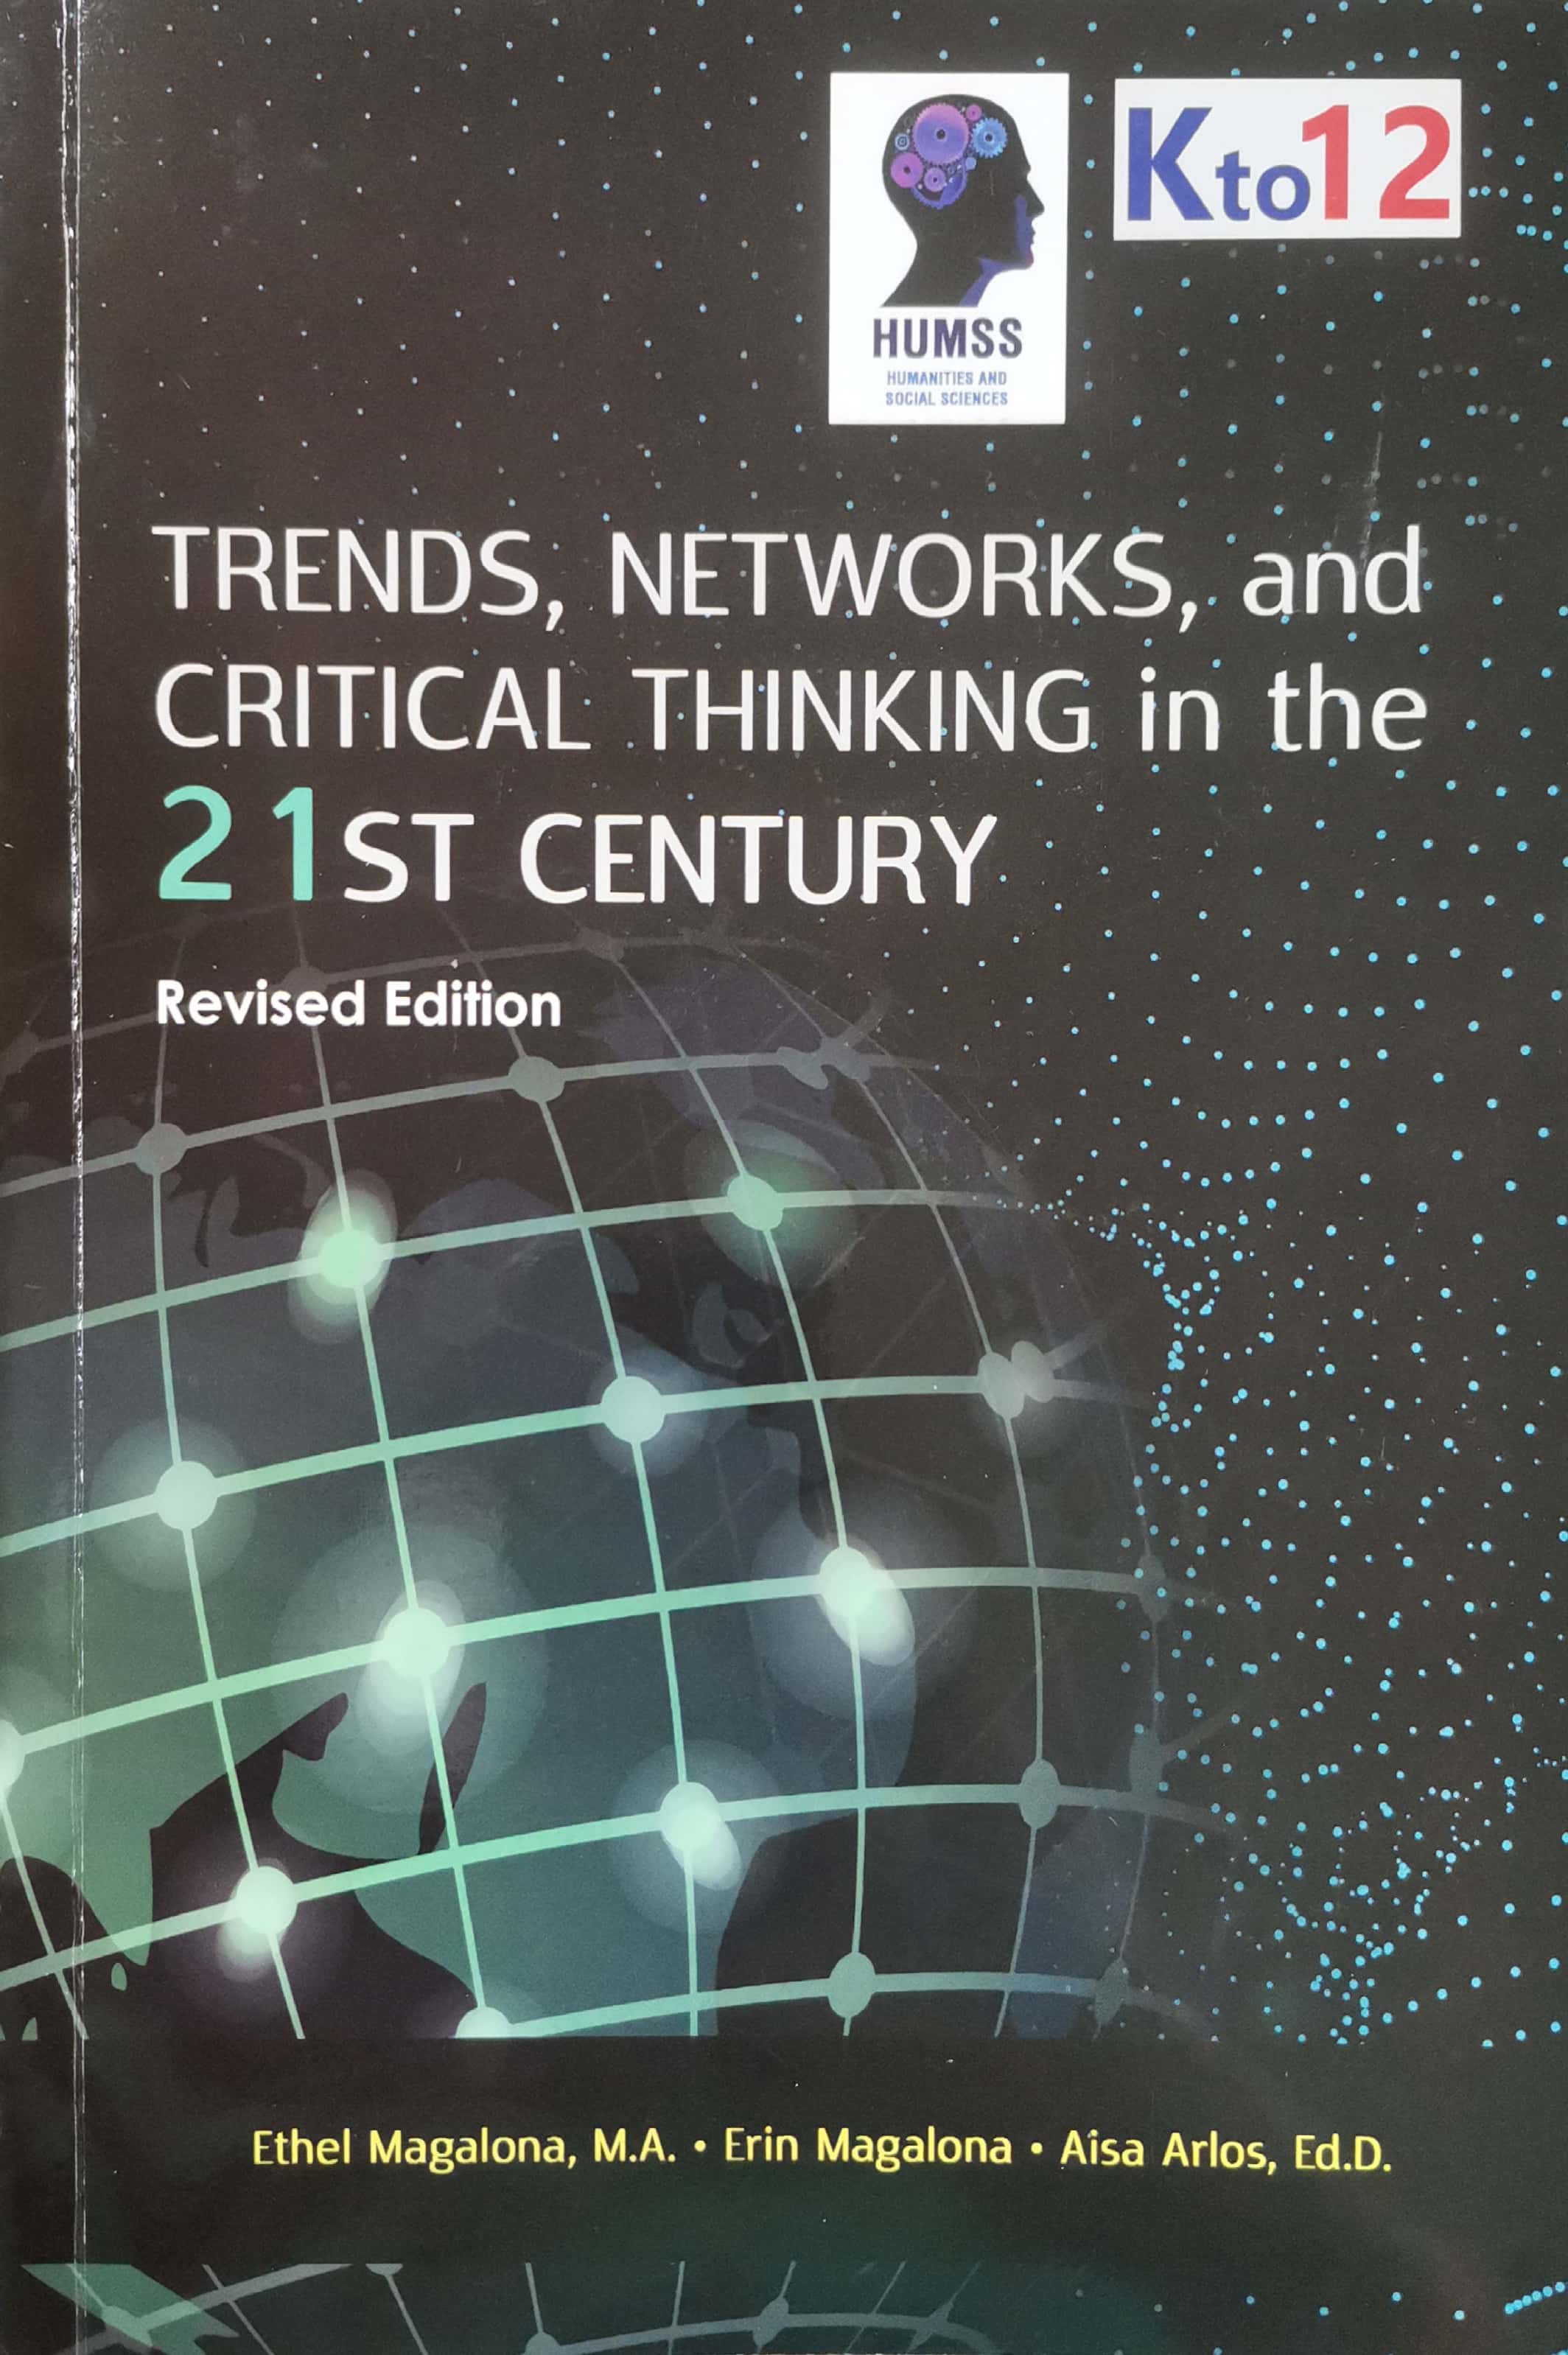 what is trends network and critical thinking subject